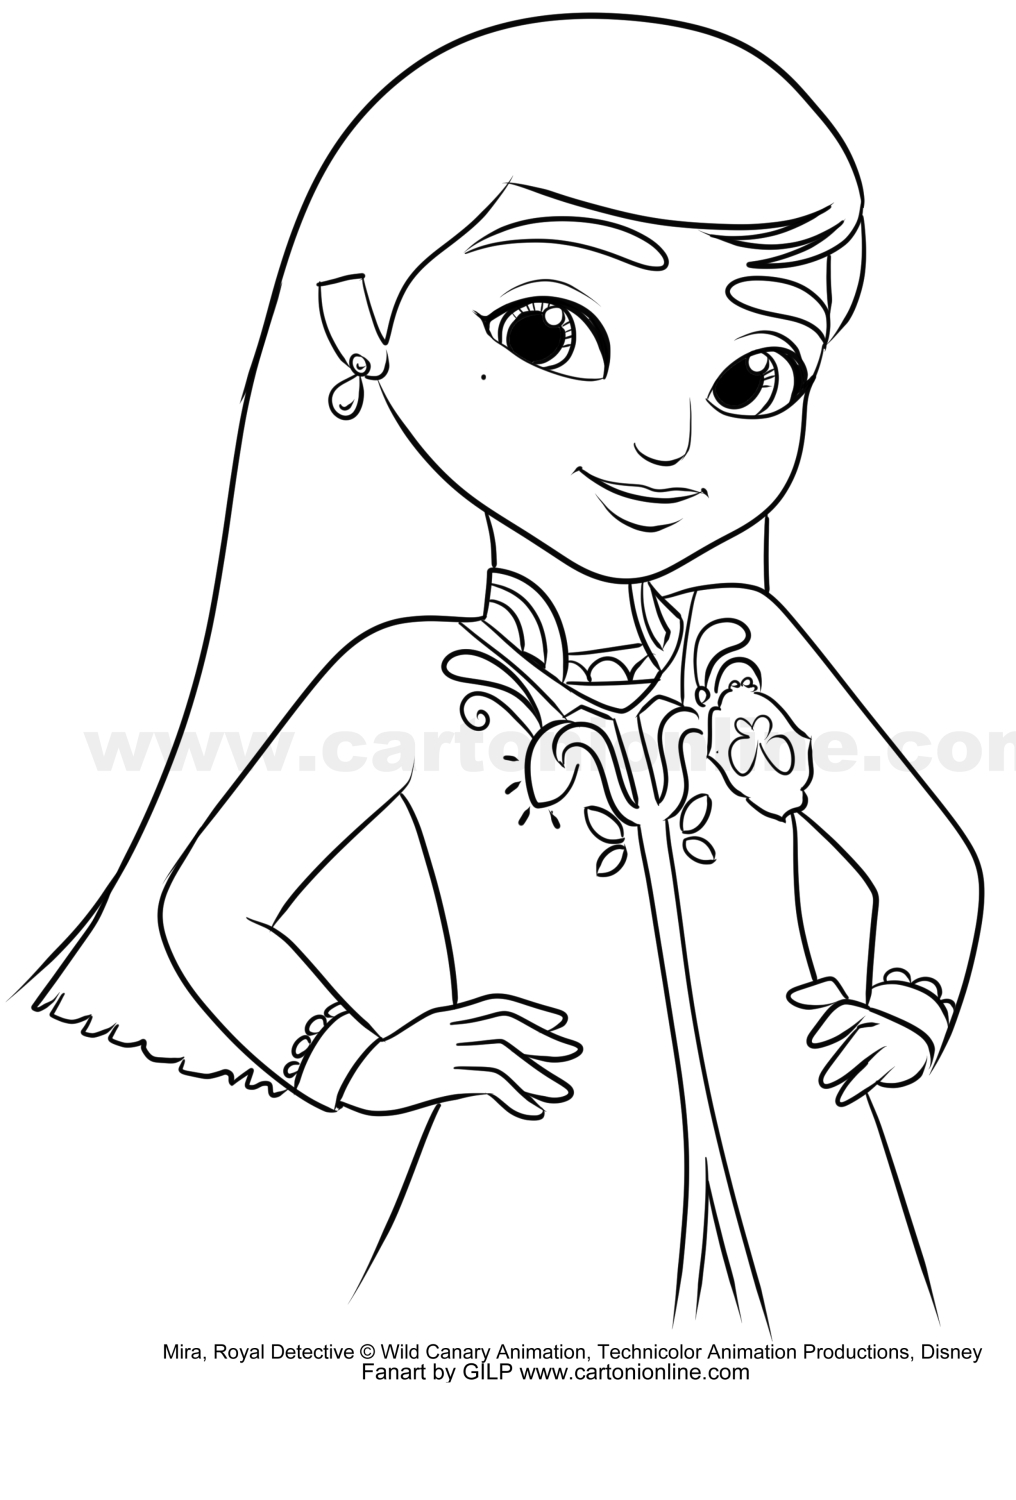 Mira from Mira, Royal Detective coloring page to print and coloring